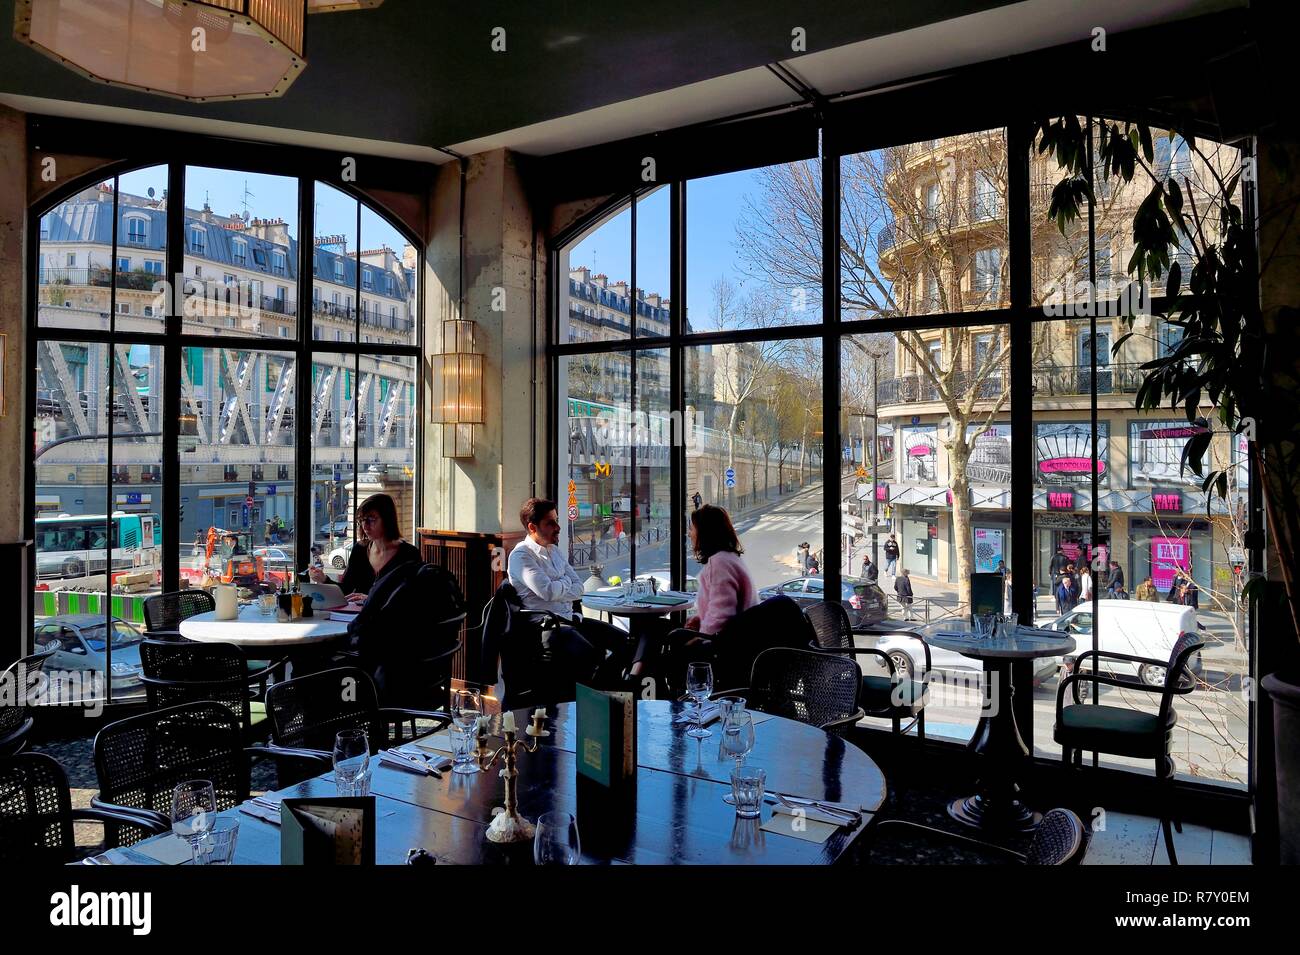 France, Paris, the Barbes district, Brasserie Barbes, the first floor overlooking the Barbes metro station Stock Photo